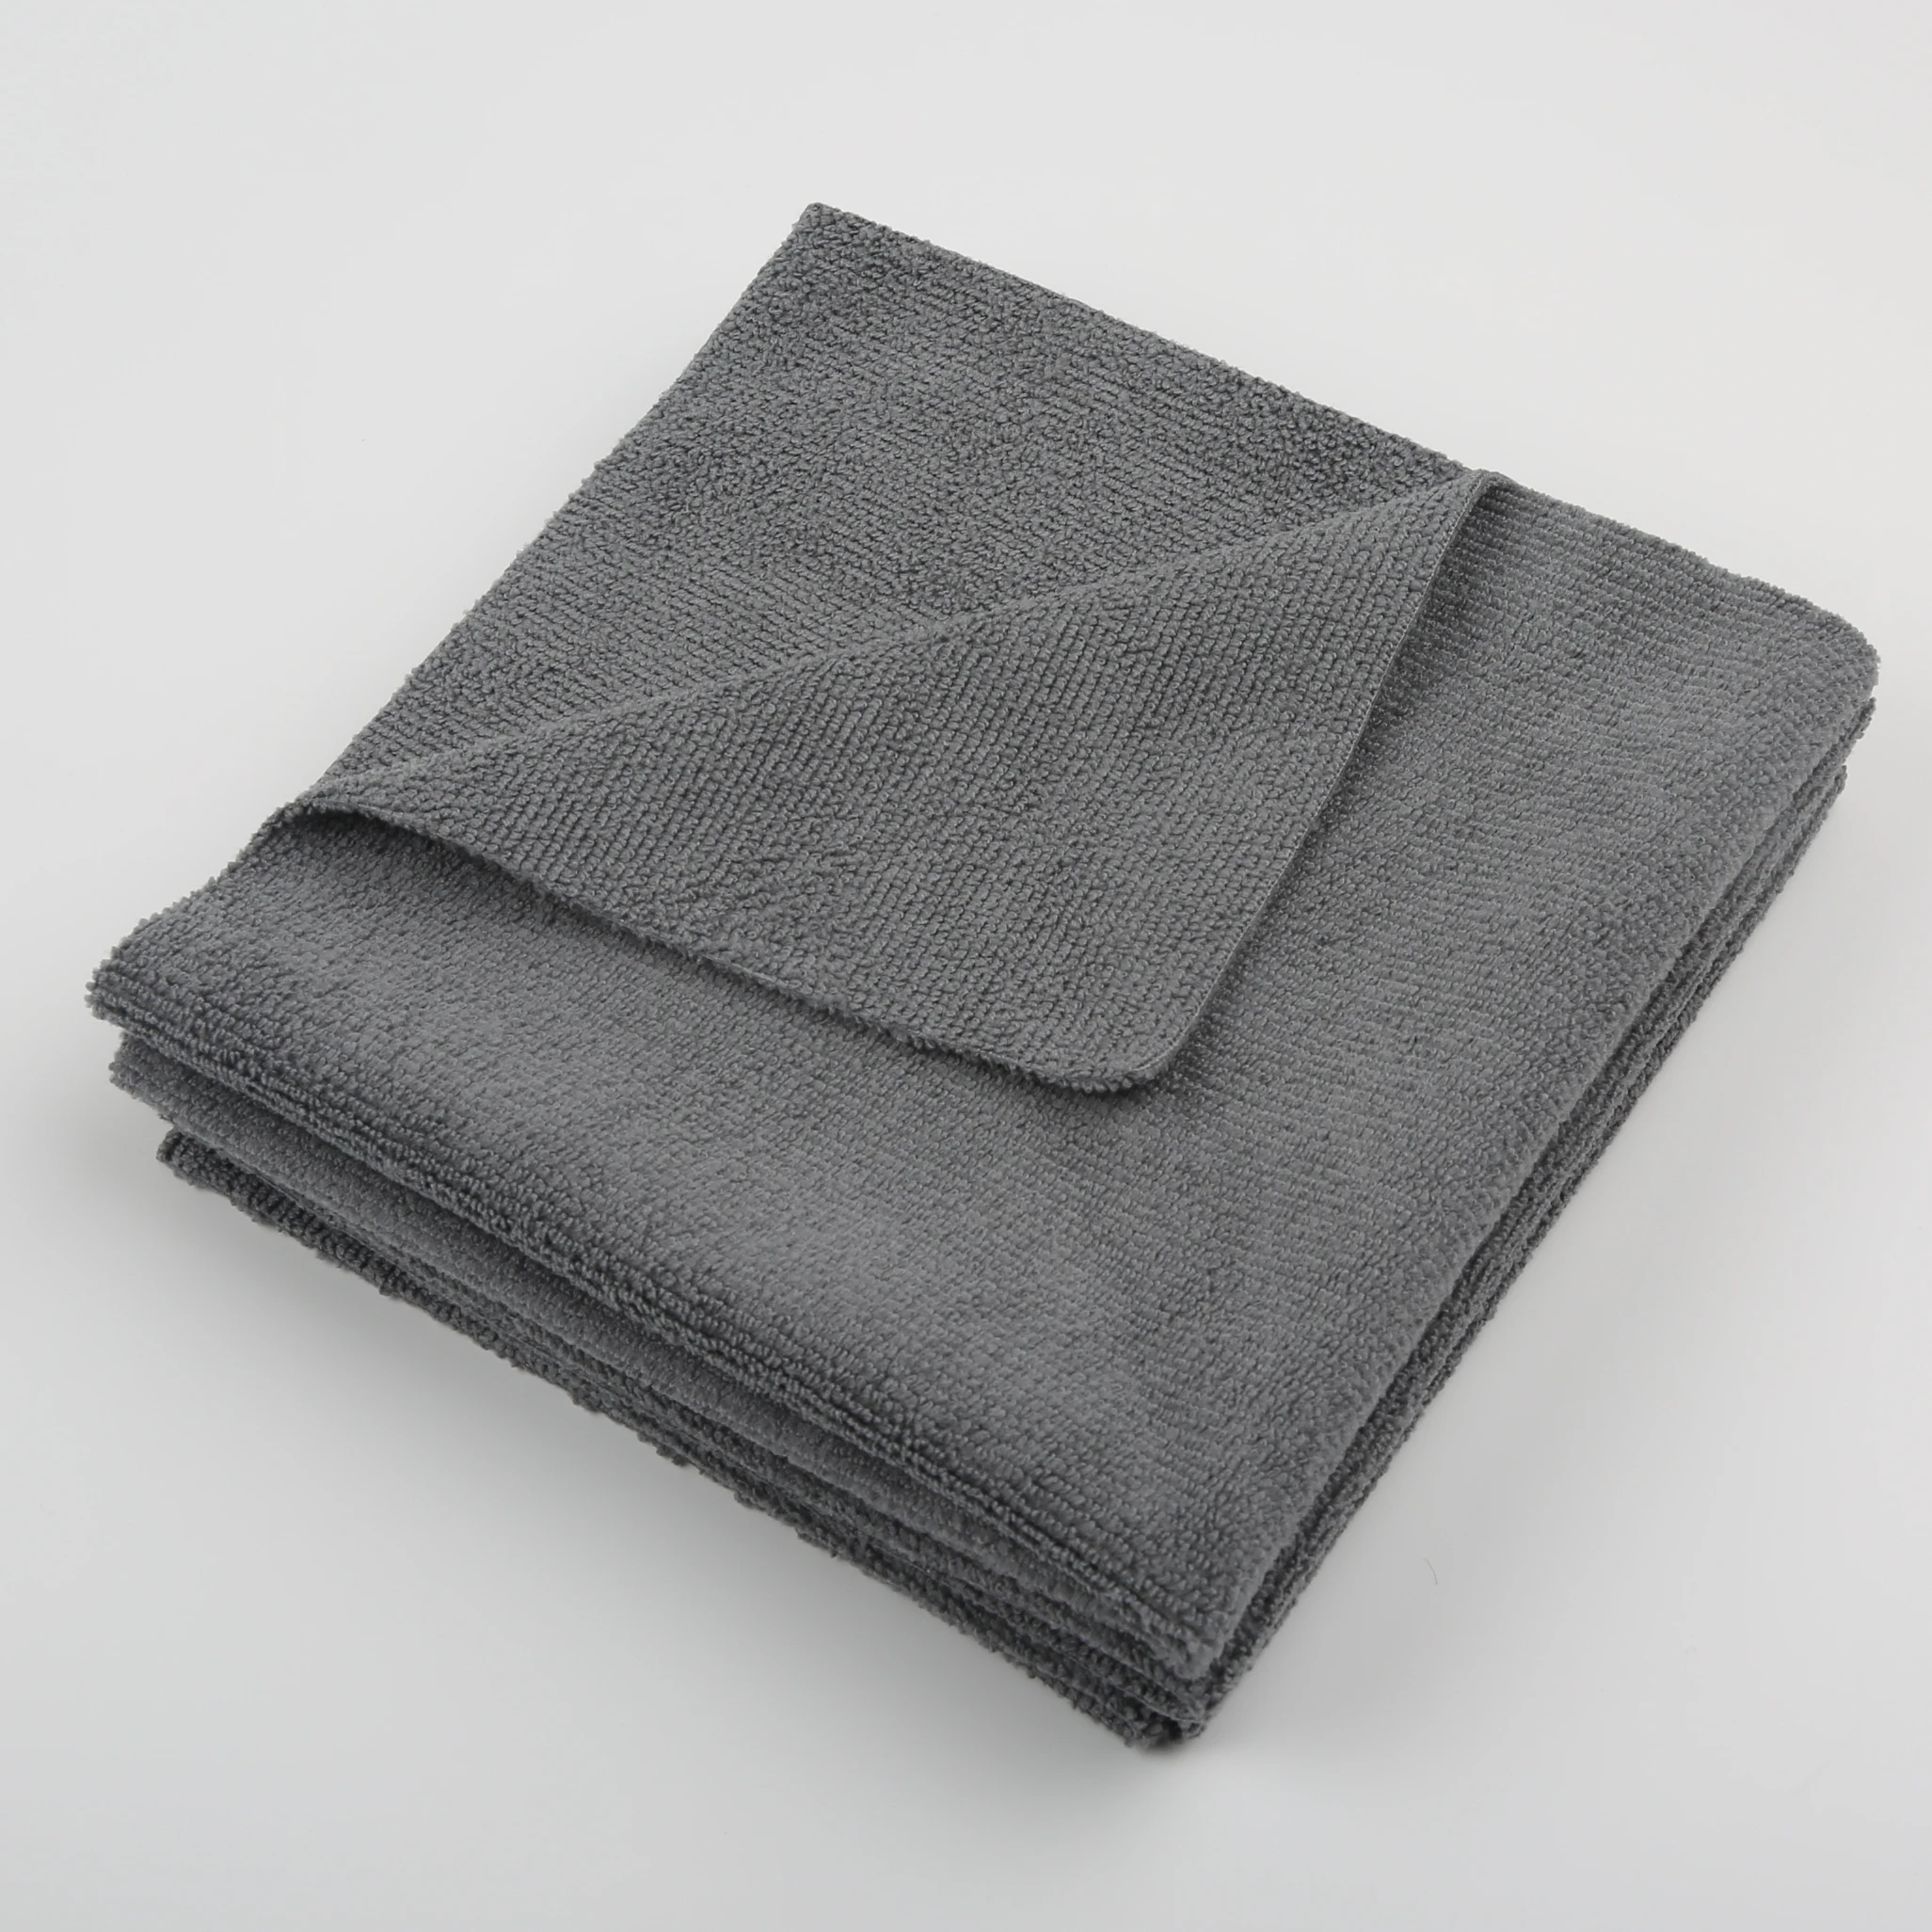 180~360gsm 70 polyester 30 polyamide edgeless microfiber floor towel cleaning cloth